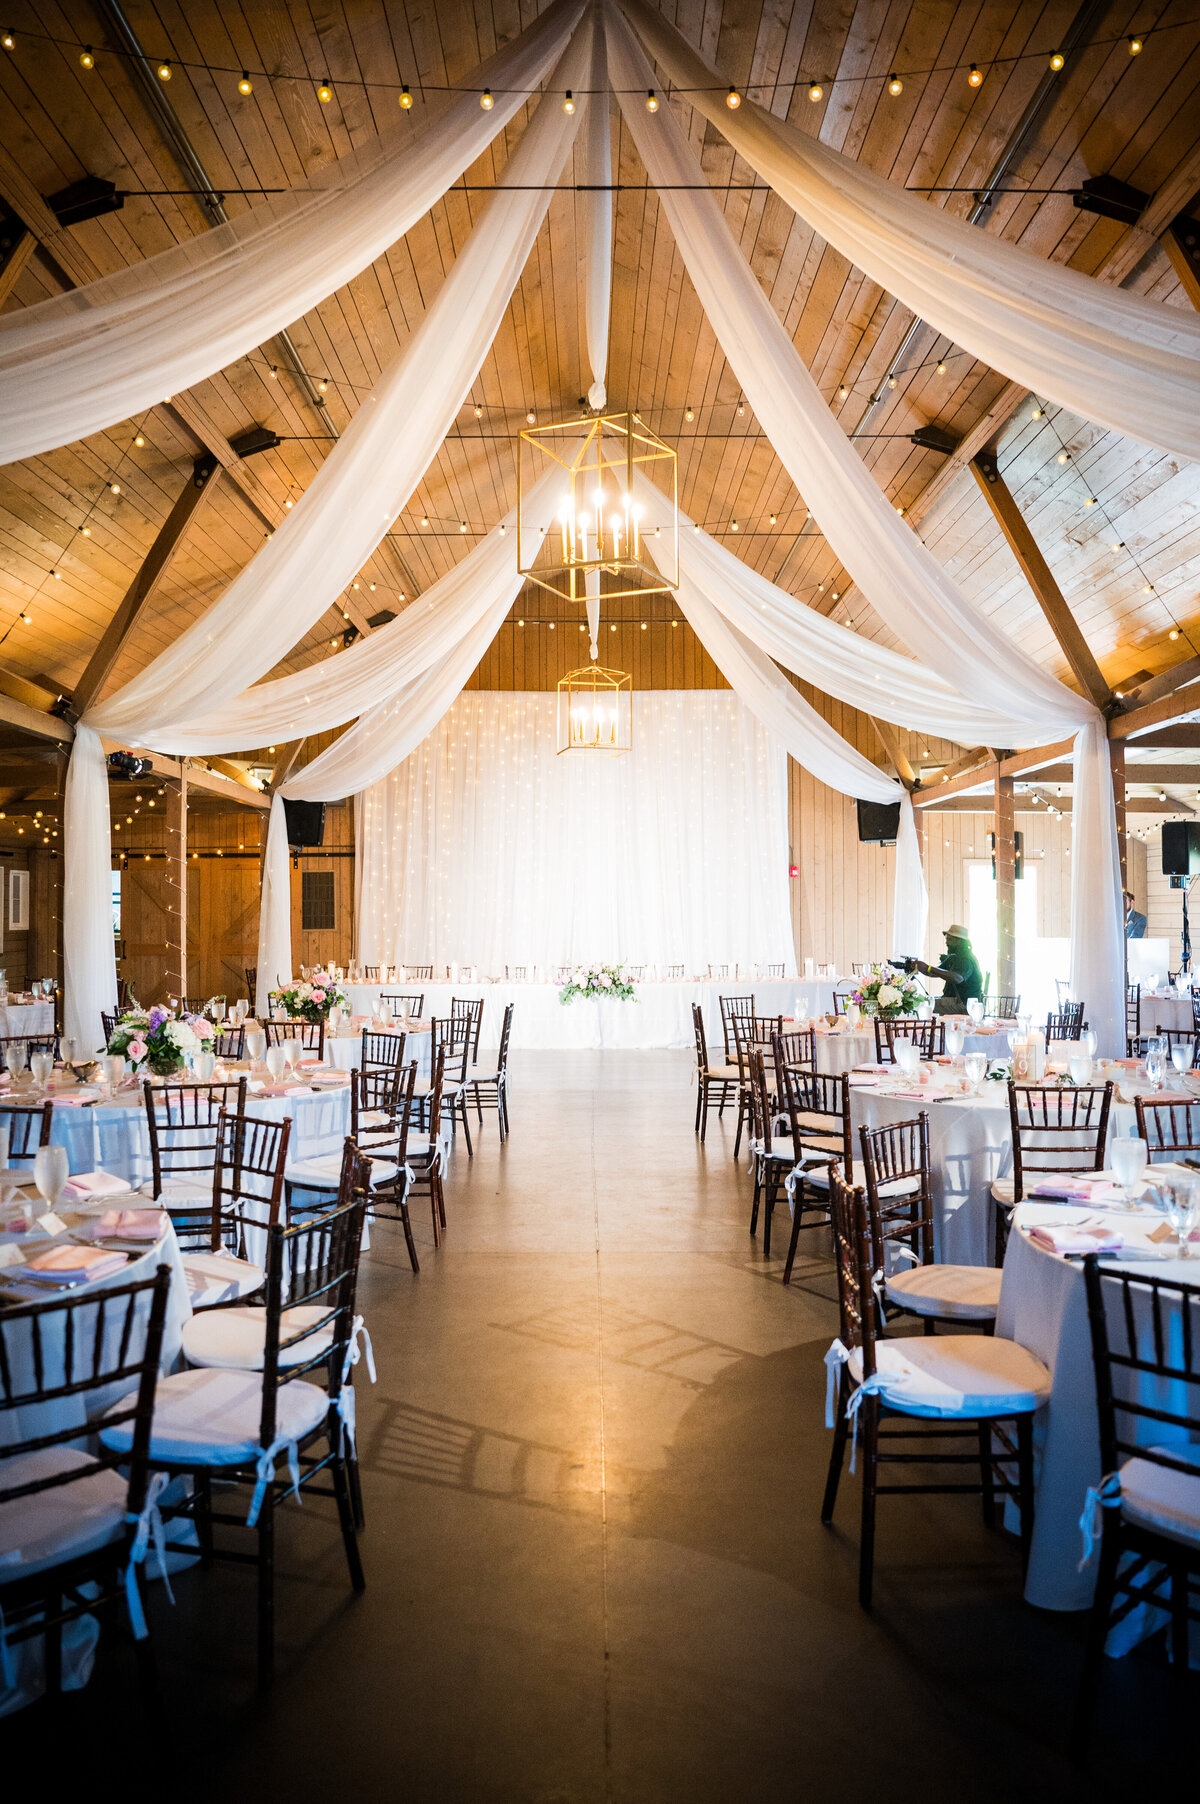 A wedding reception space is adorned with twinkle lights and white fabric draping the ceiling.